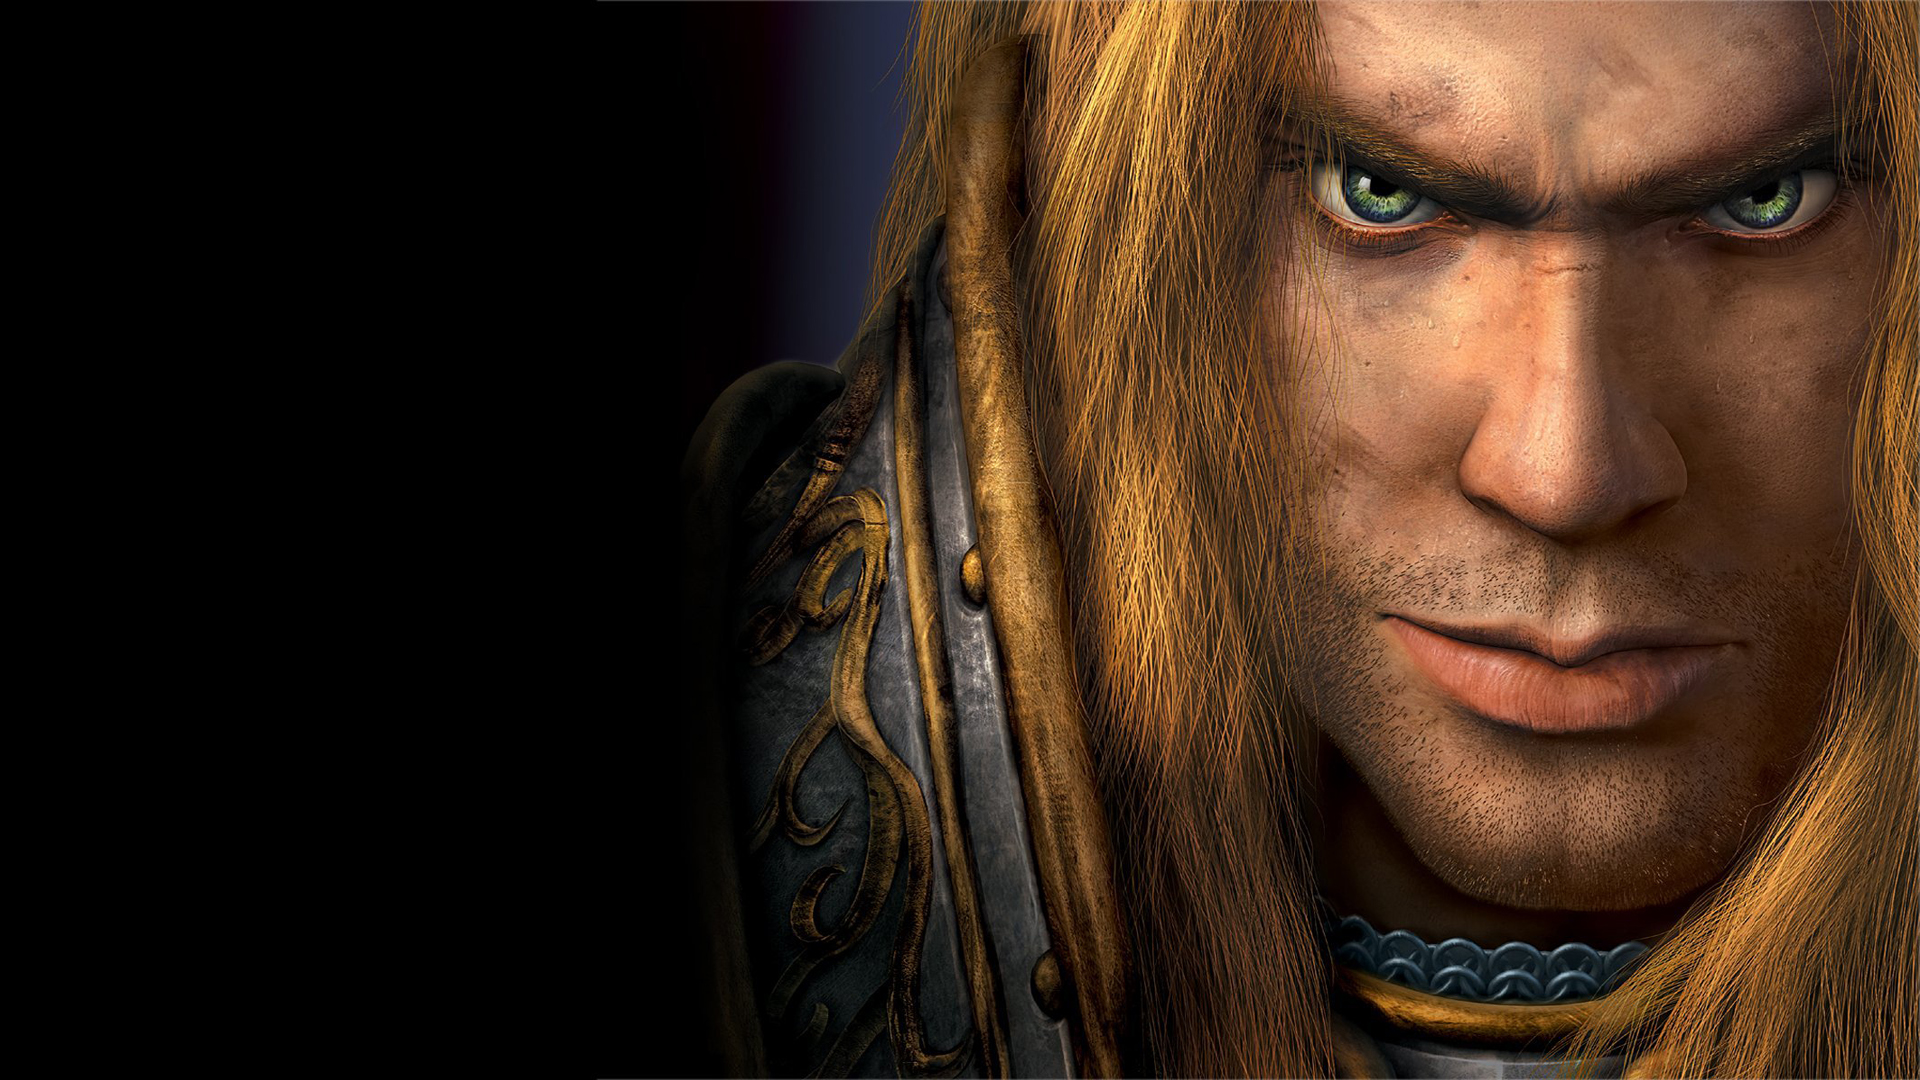 Video Game Warcraft III: Reign of Chaos HD Wallpaper | Background Image